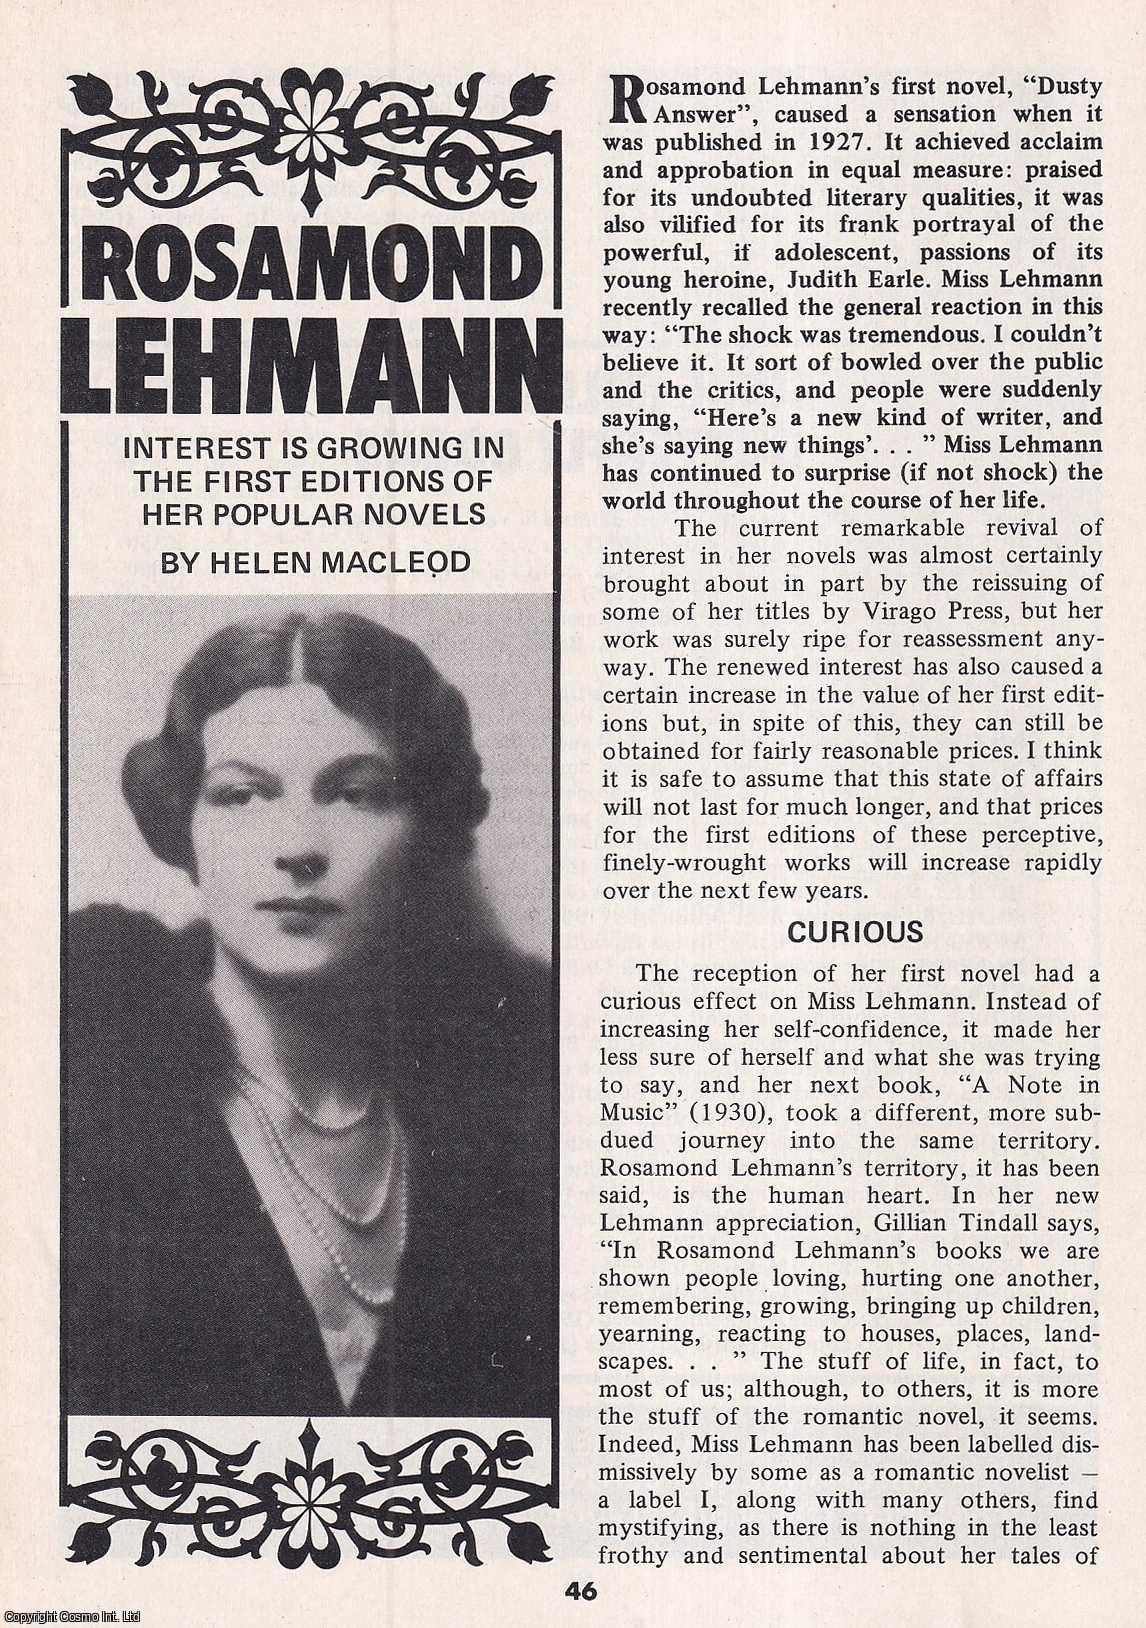 Helen Macleod - Rosamond Lehmann : Novelist. This is an original article separated from an issue of The Book & Magazine Collector publication.